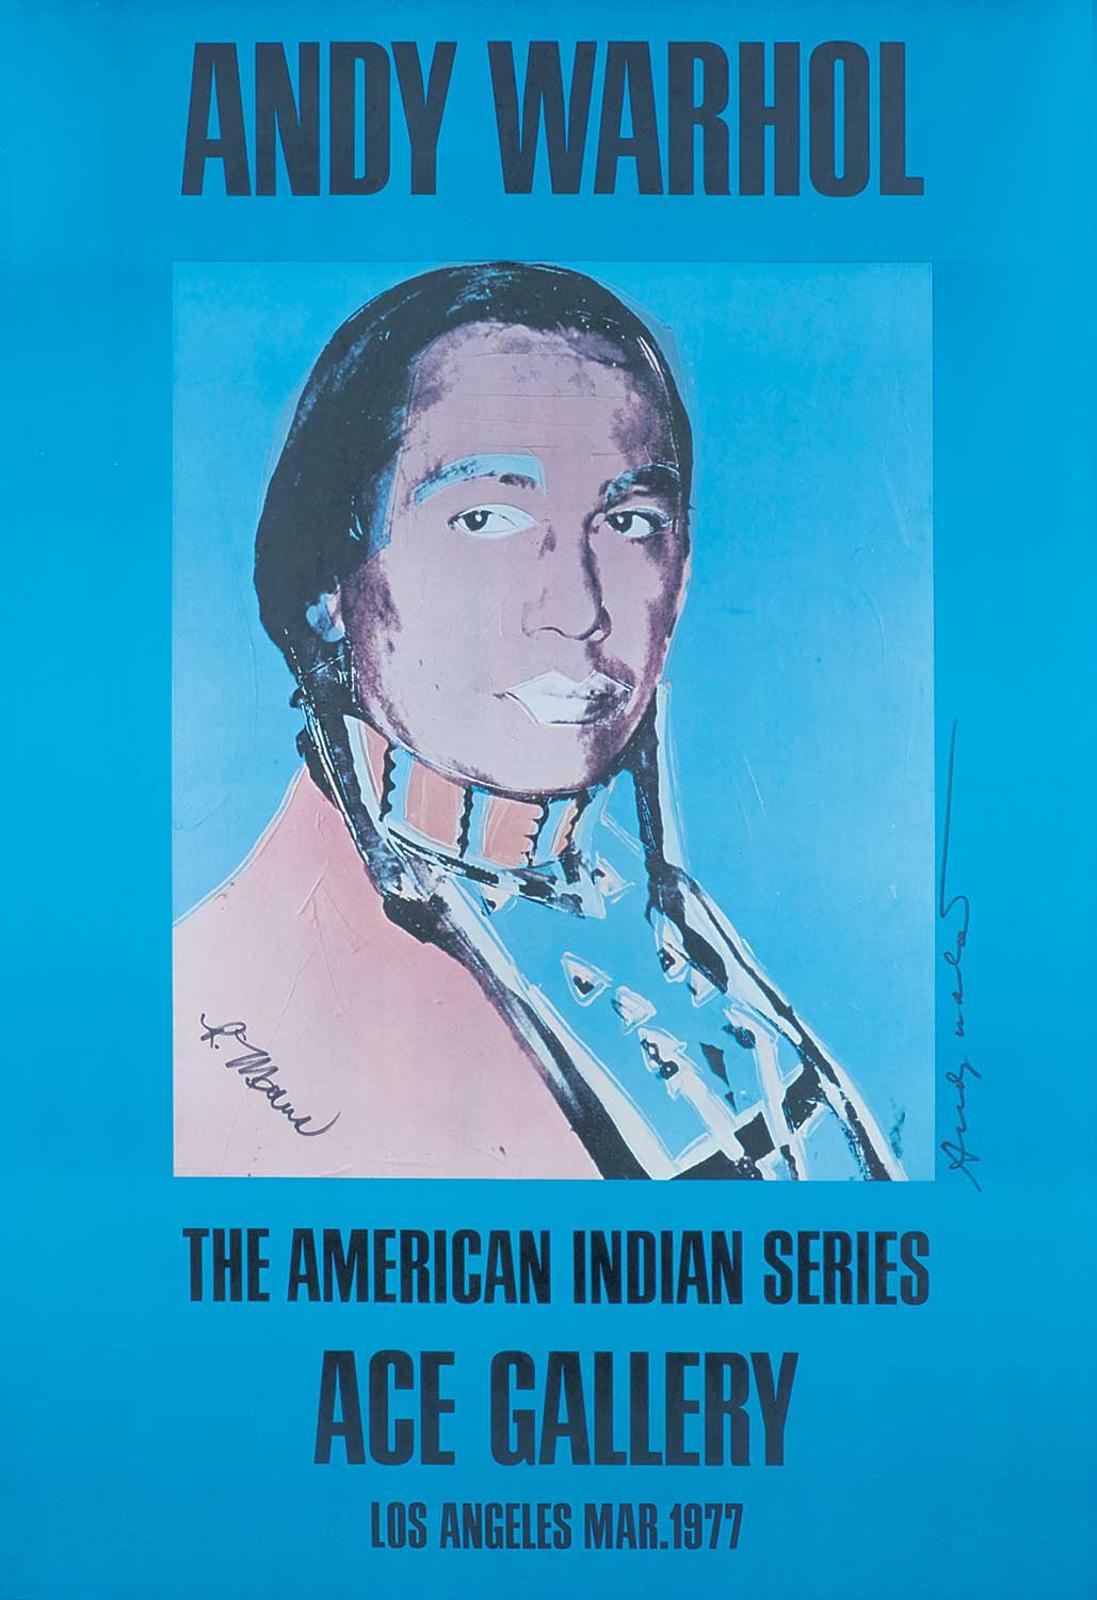 Andy Warhol (1928-1987) - The American Indian Series, Ace Gallery, Los Angeles